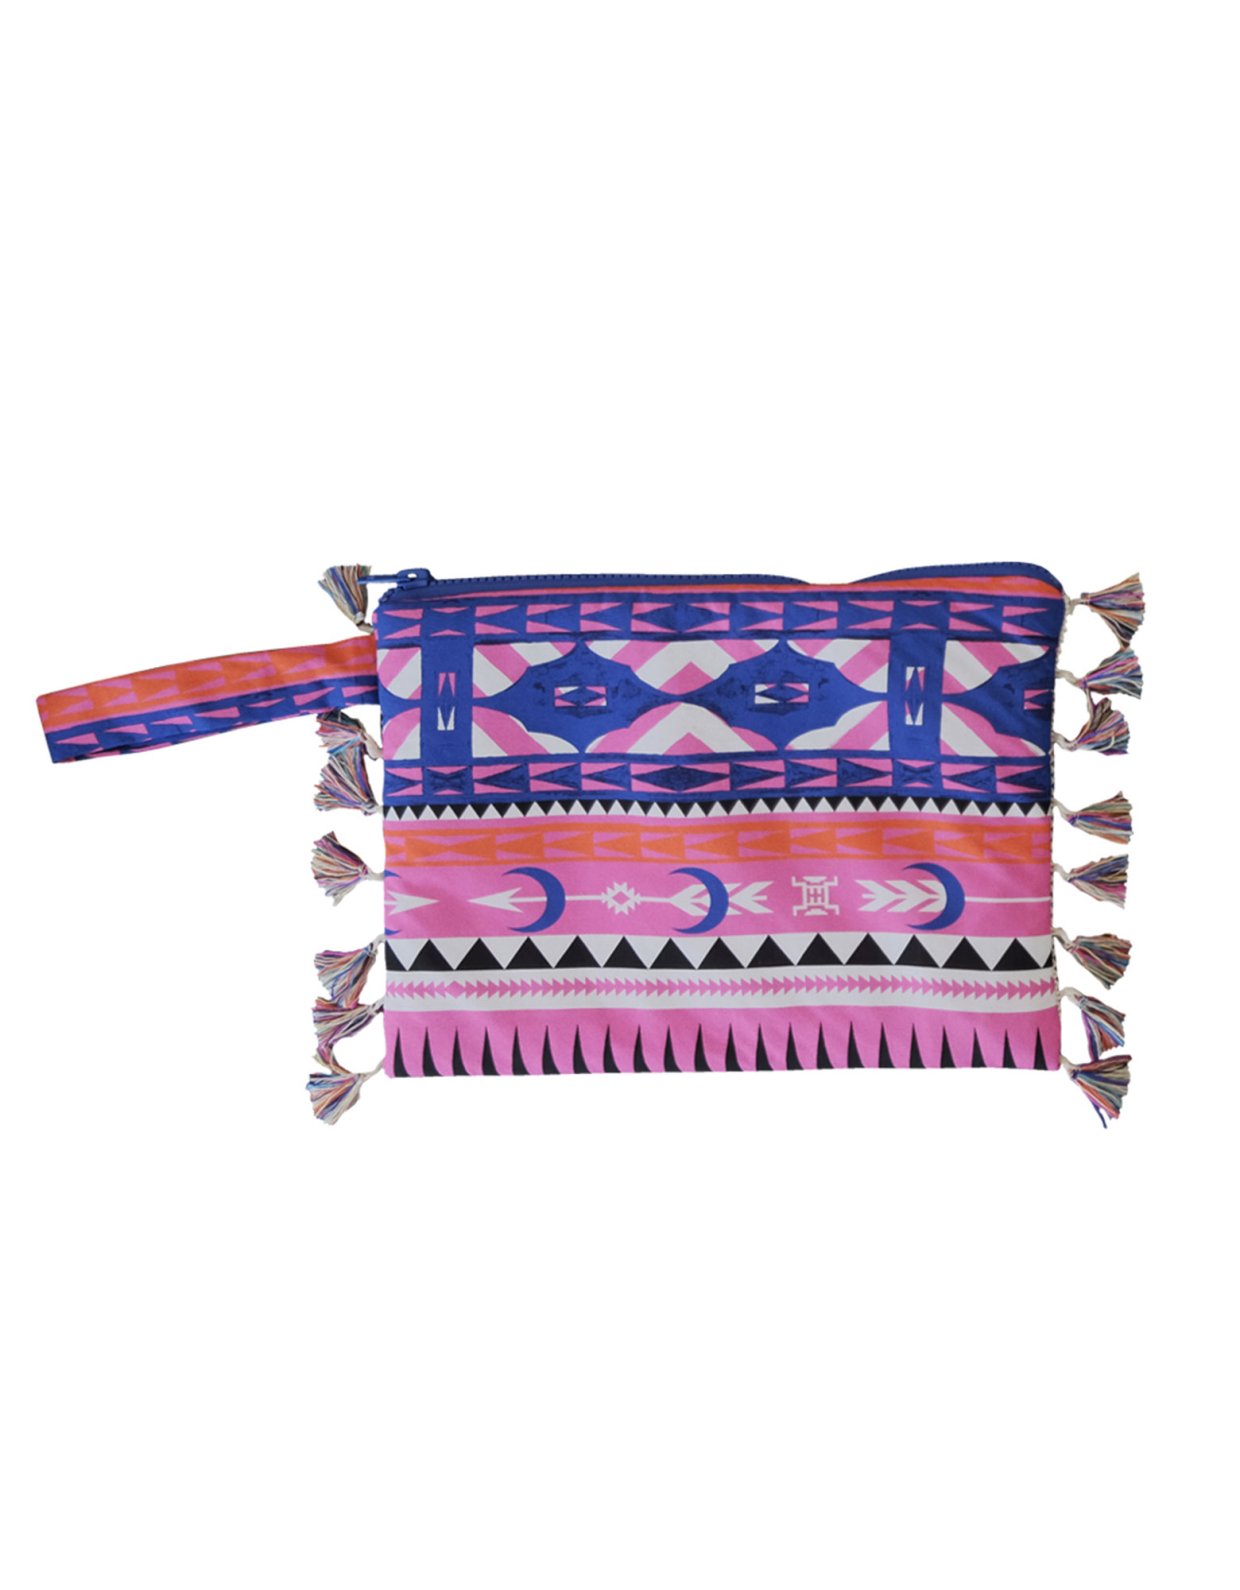 Peace & Chaos Endemic pouch